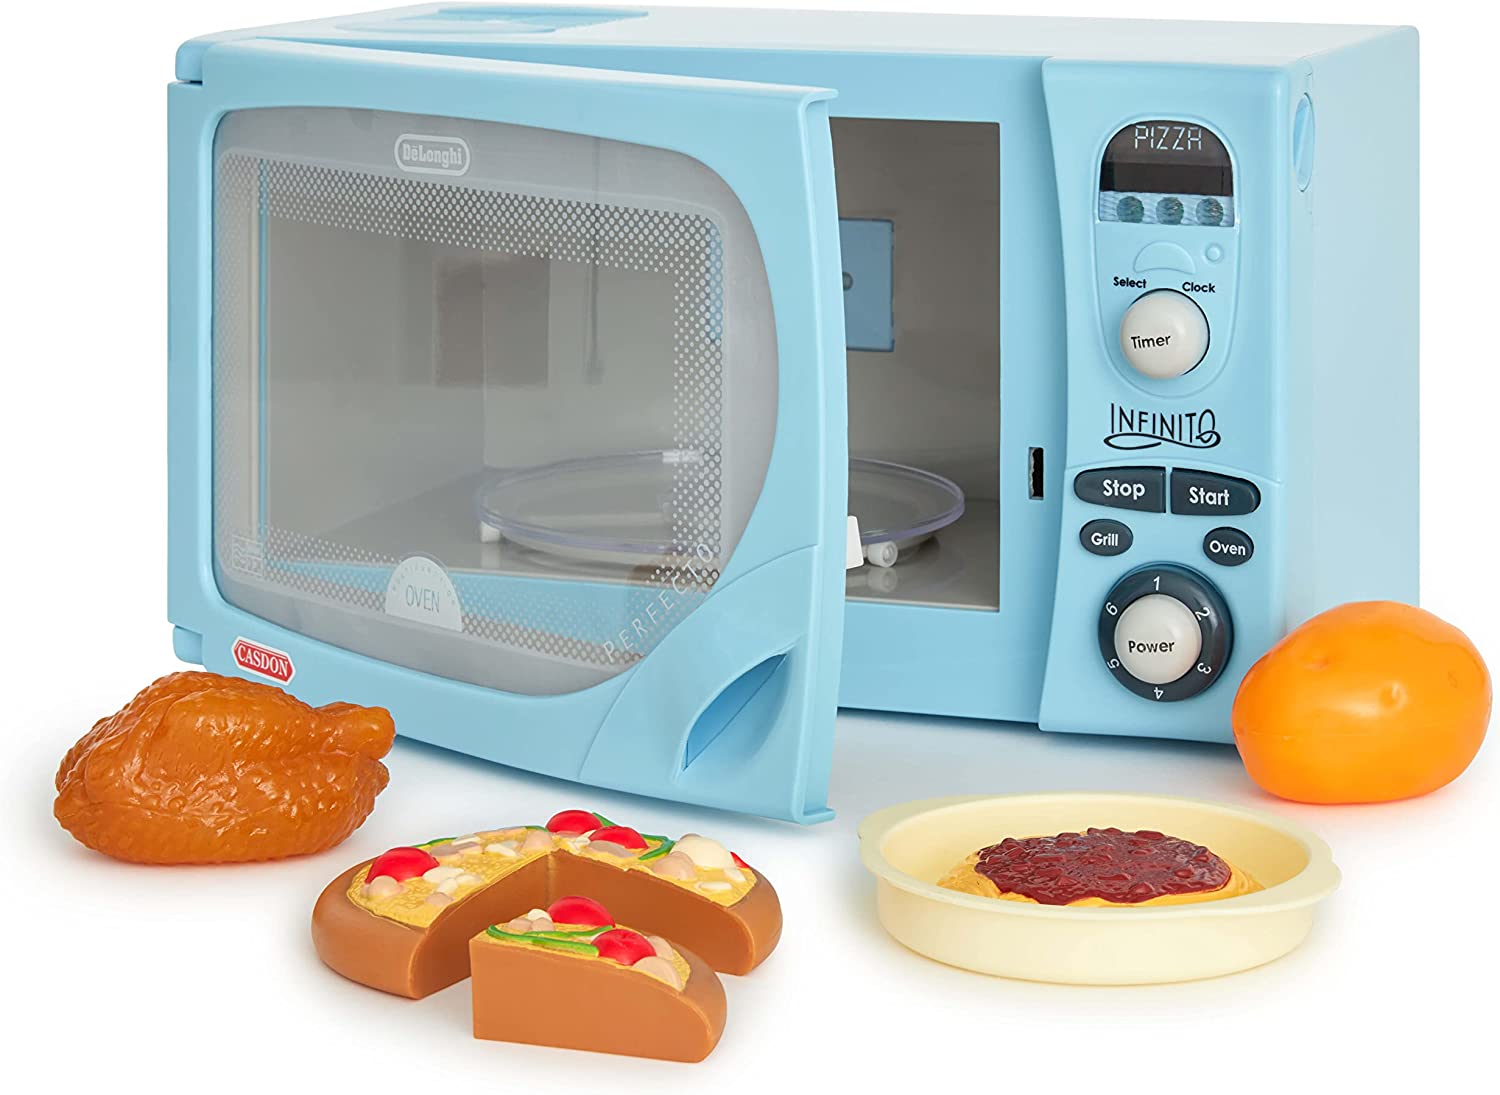  Casdon DeLonghi Microwave. Toy Replica of DeLonghi's 'Infinito'  Microwave for Children Aged 3+. Featuring Flashing LED's, Sounds &  More,Silver : Home & Kitchen